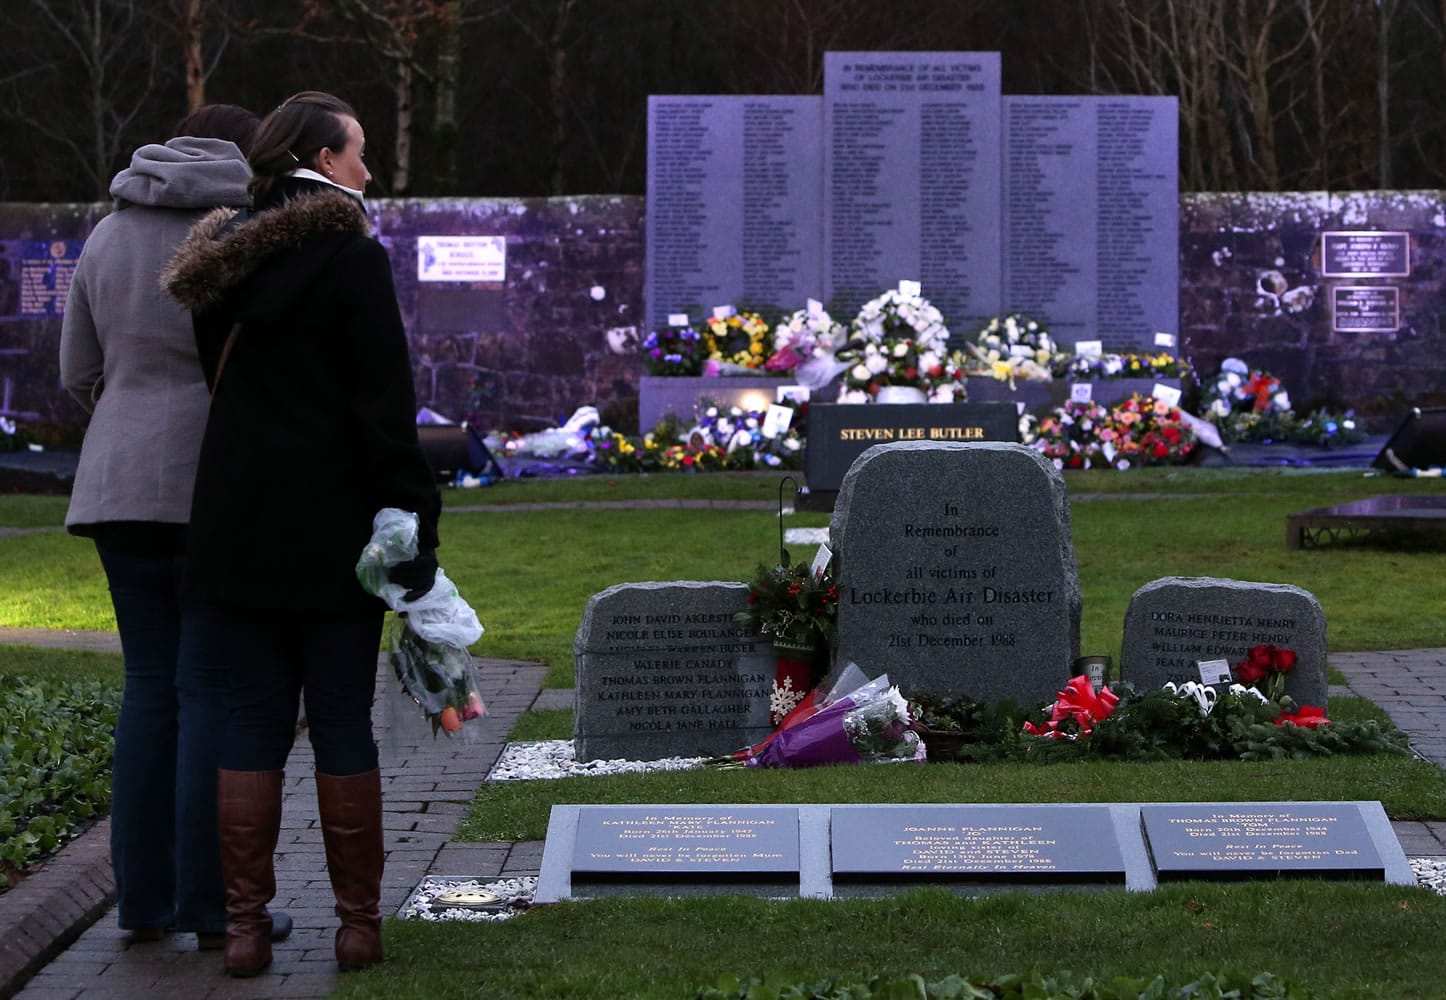 Members of the public visit the main memorial stone in memory of the victims of the Pan Am flight 103 bombing Saturday in the garden of remembrance at Dryfesdale Cemetery, near Lockerbie, Scotland.